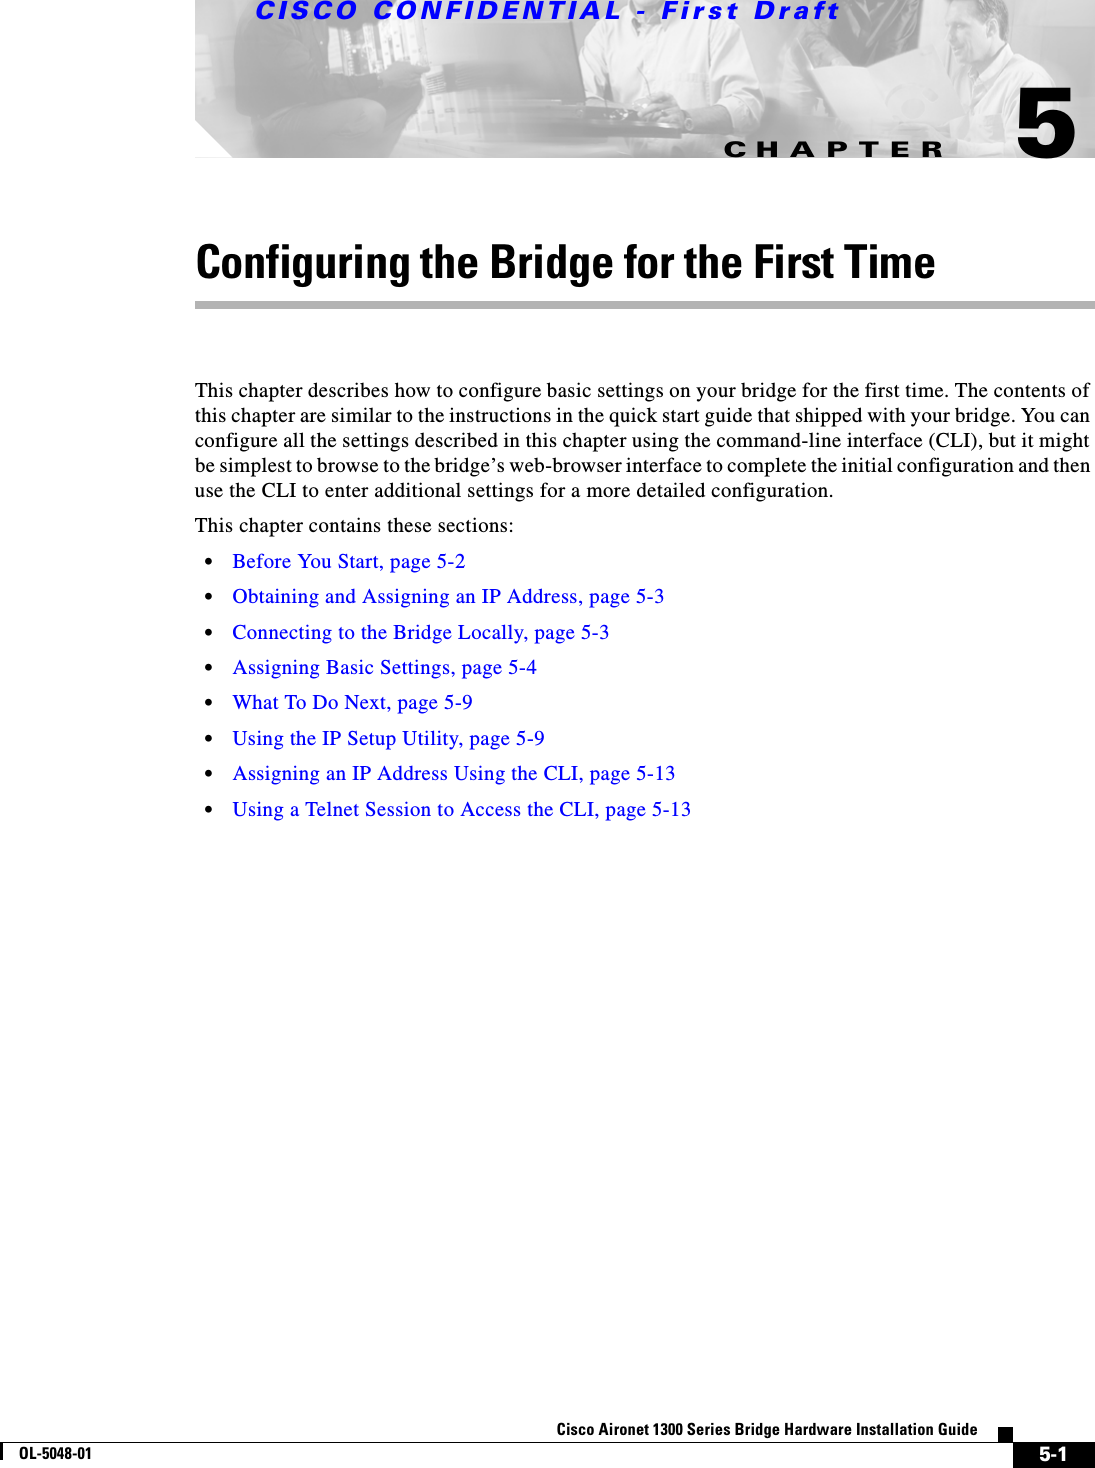 CHAPTERCISCO CONFIDENTIAL - First Draft5-1Cisco Aironet 1300 Series Bridge Hardware Installation GuideOL-5048-015Configuring the Bridge for the First TimeThis chapter describes how to configure basic settings on your bridge for the first time. The contents of this chapter are similar to the instructions in the quick start guide that shipped with your bridge. You can configure all the settings described in this chapter using the command-line interface (CLI), but it might be simplest to browse to the bridge’s web-browser interface to complete the initial configuration and then use the CLI to enter additional settings for a more detailed configuration. This chapter contains these sections:•Before You Start, page 5-2•Obtaining and Assigning an IP Address, page 5-3•Connecting to the Bridge Locally, page 5-3•Assigning Basic Settings, page 5-4•What To Do Next, page 5-9•Using the IP Setup Utility, page 5-9•Assigning an IP Address Using the CLI, page 5-13•Using a Telnet Session to Access the CLI, page 5-13